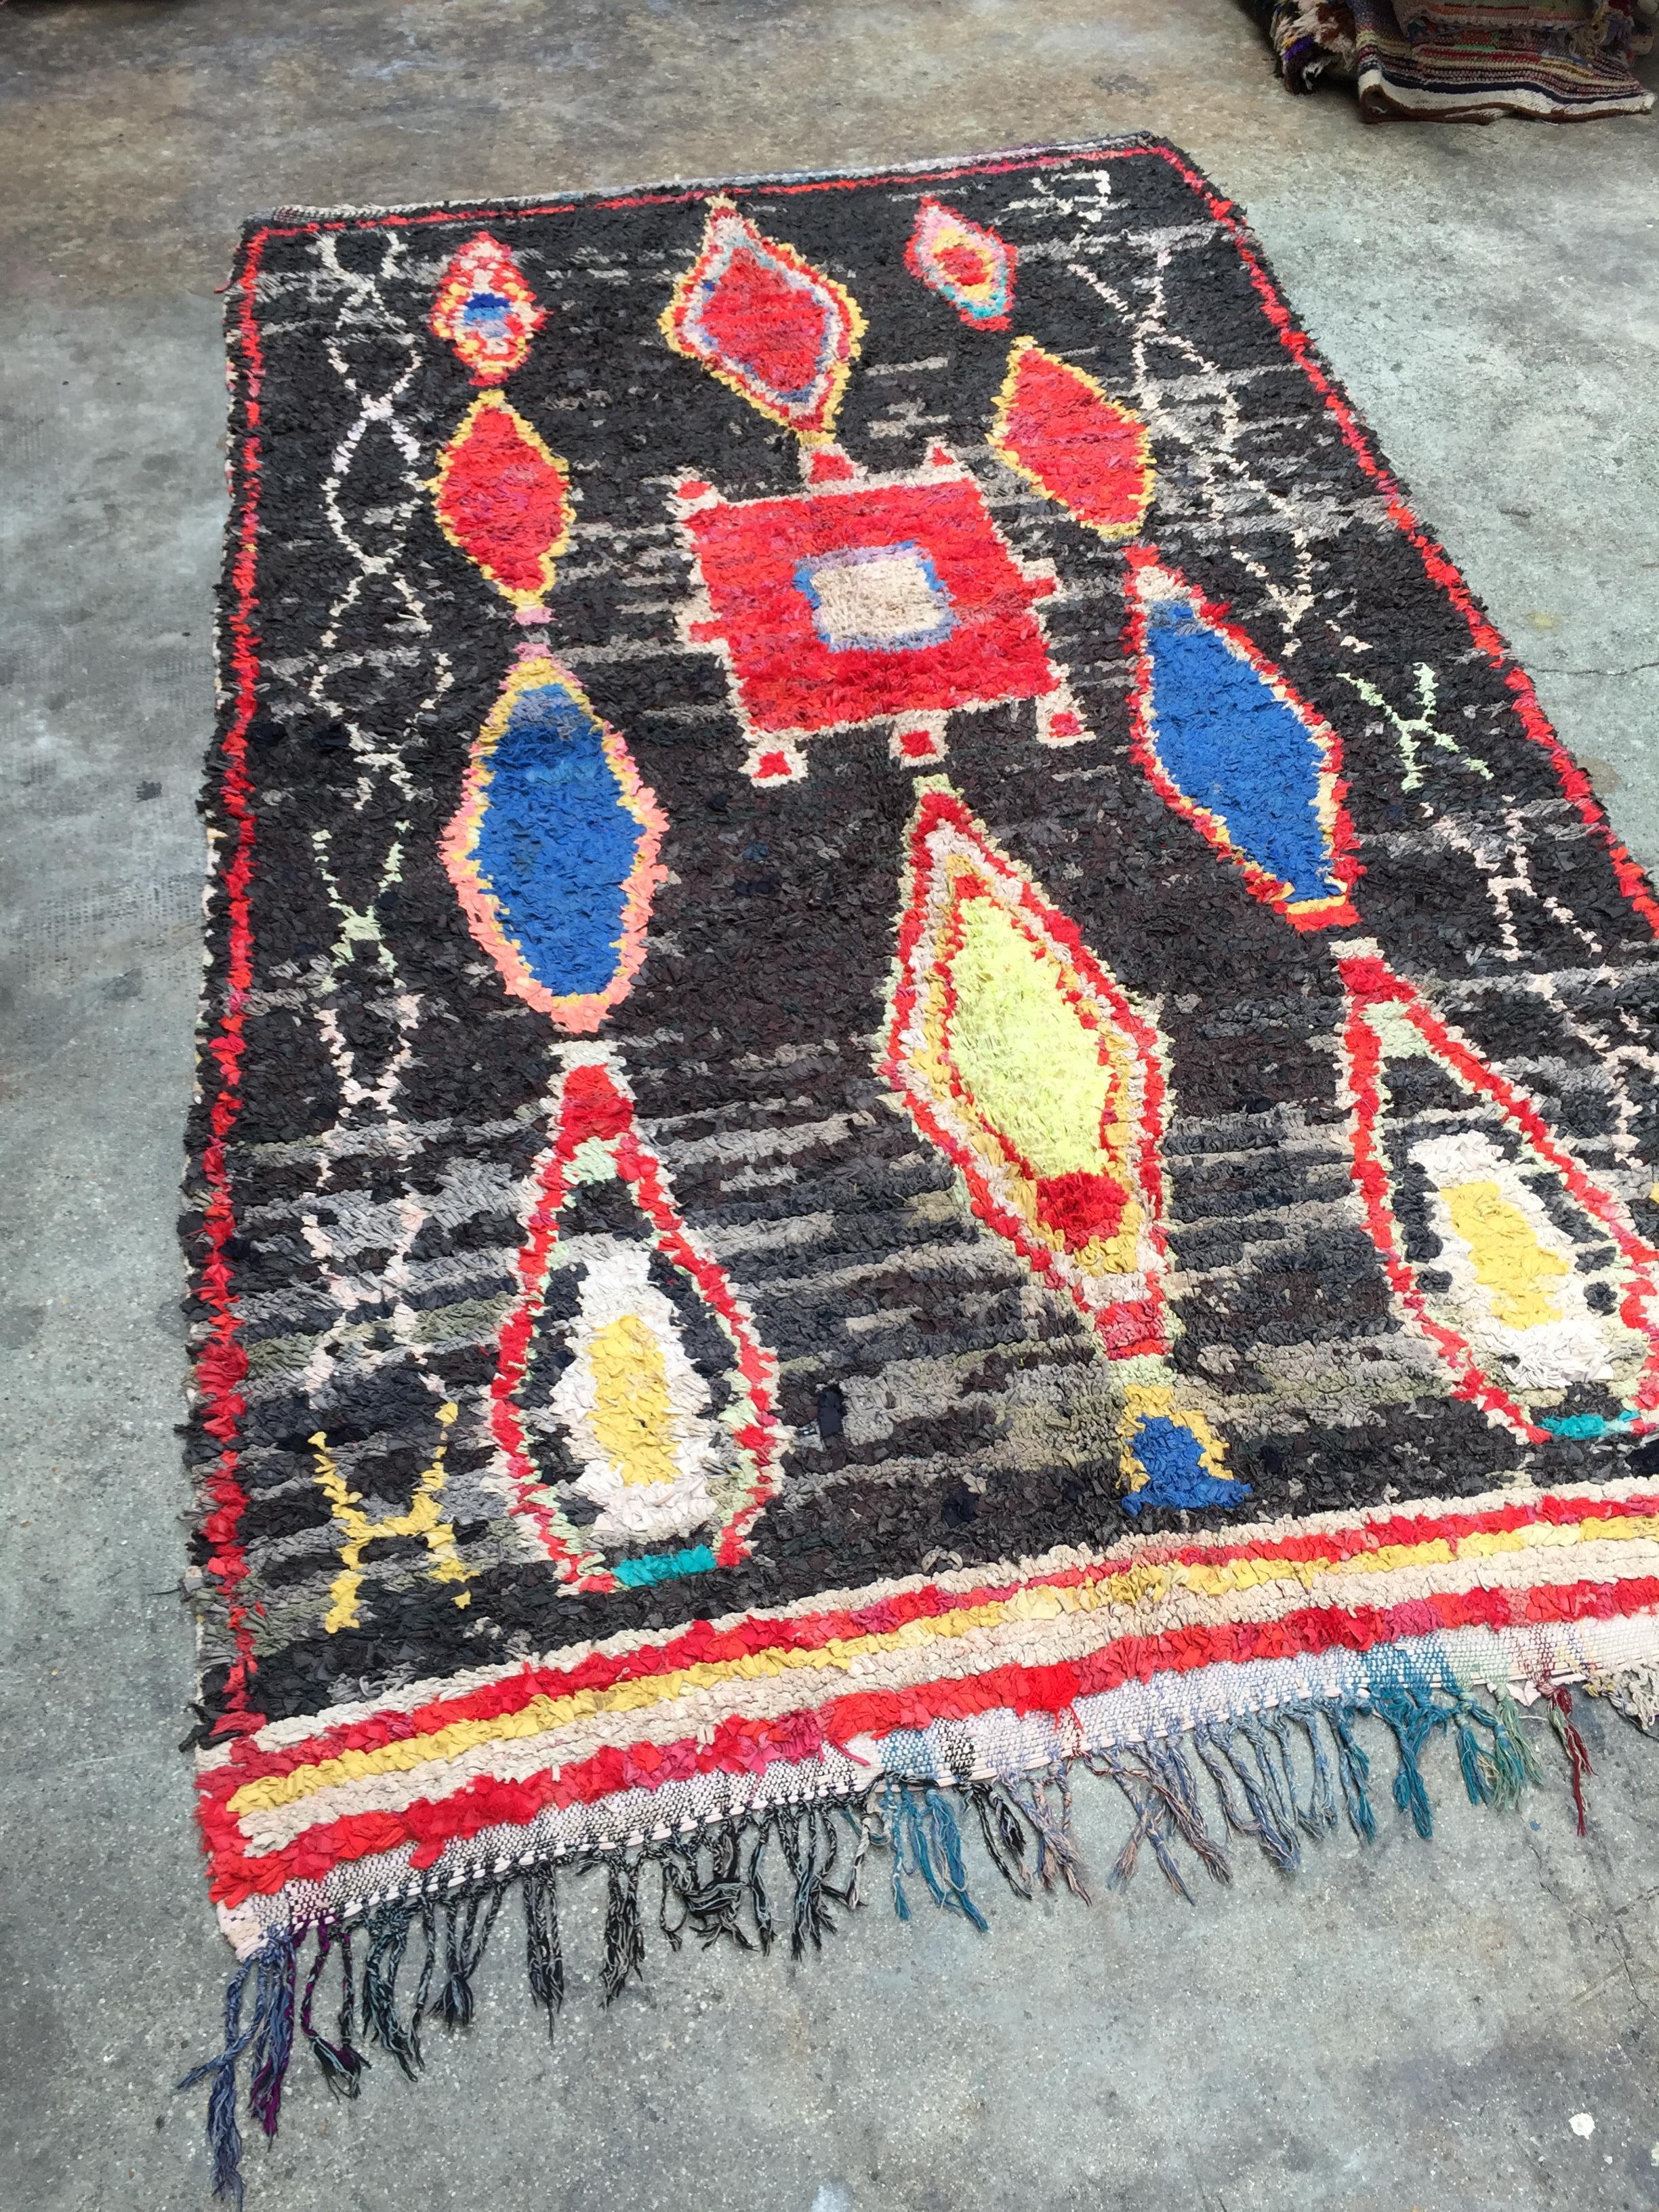 Boucherouite rug
Measures: 270 x 160 cm // 8.8 x 5.2 ft.
Hand-knotted fabrics
One of a kind berber tribal rug
Handmade in Morocco
1980s



    